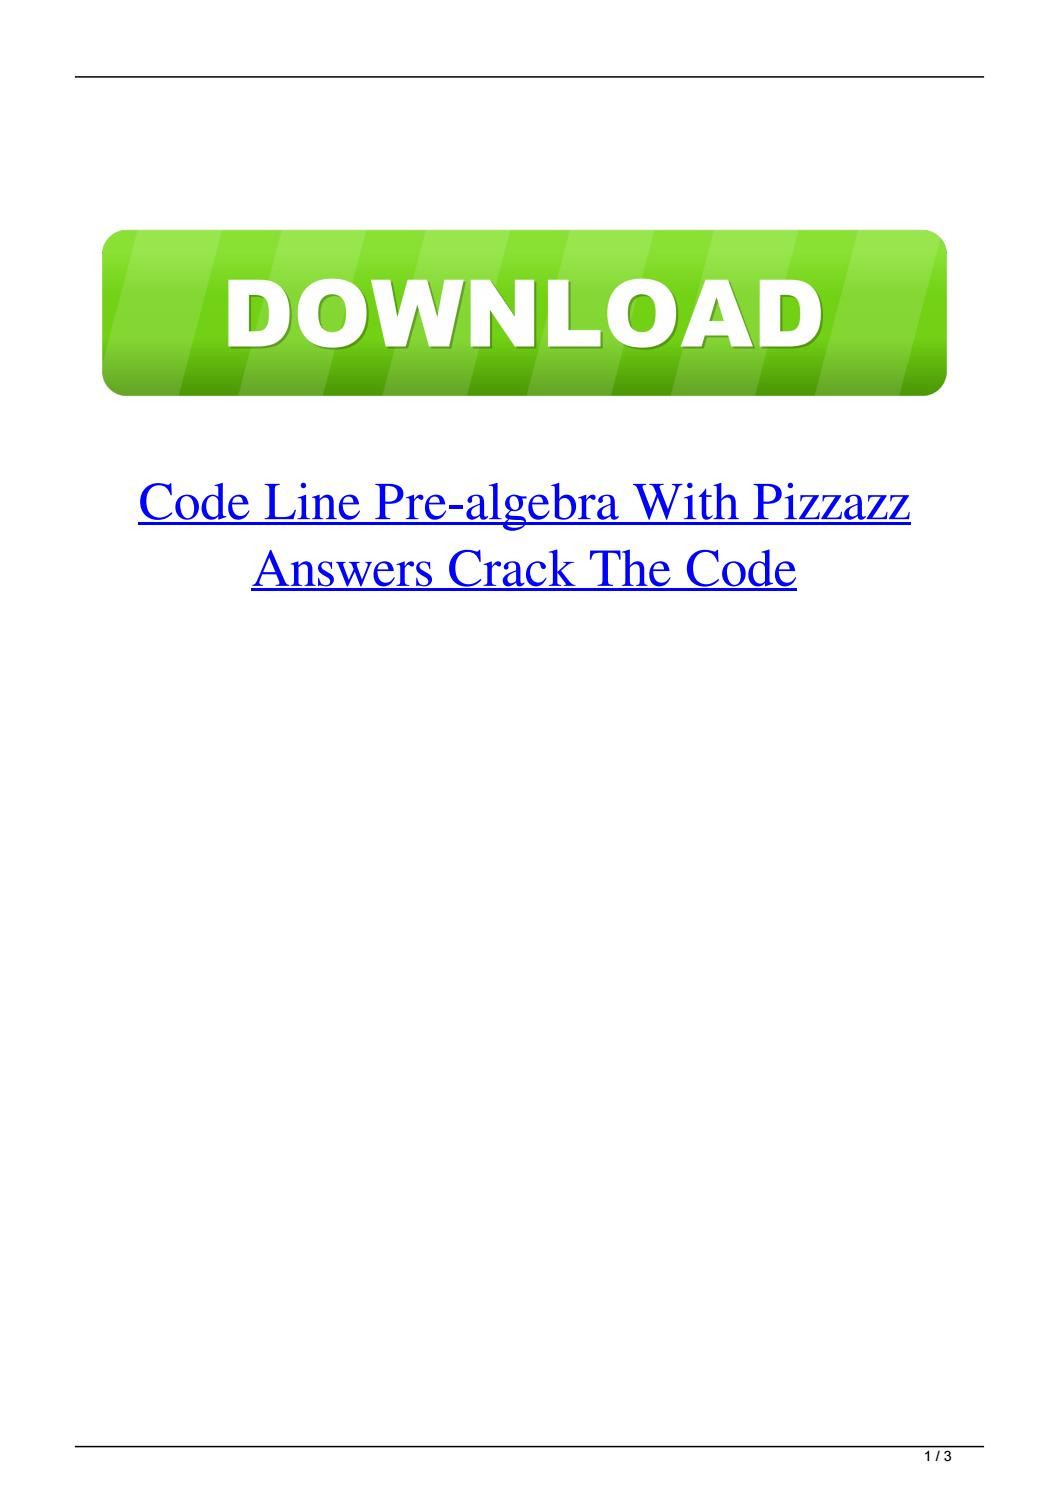 Code Line Prealgebra With Pizzazz Answers Crack The Code